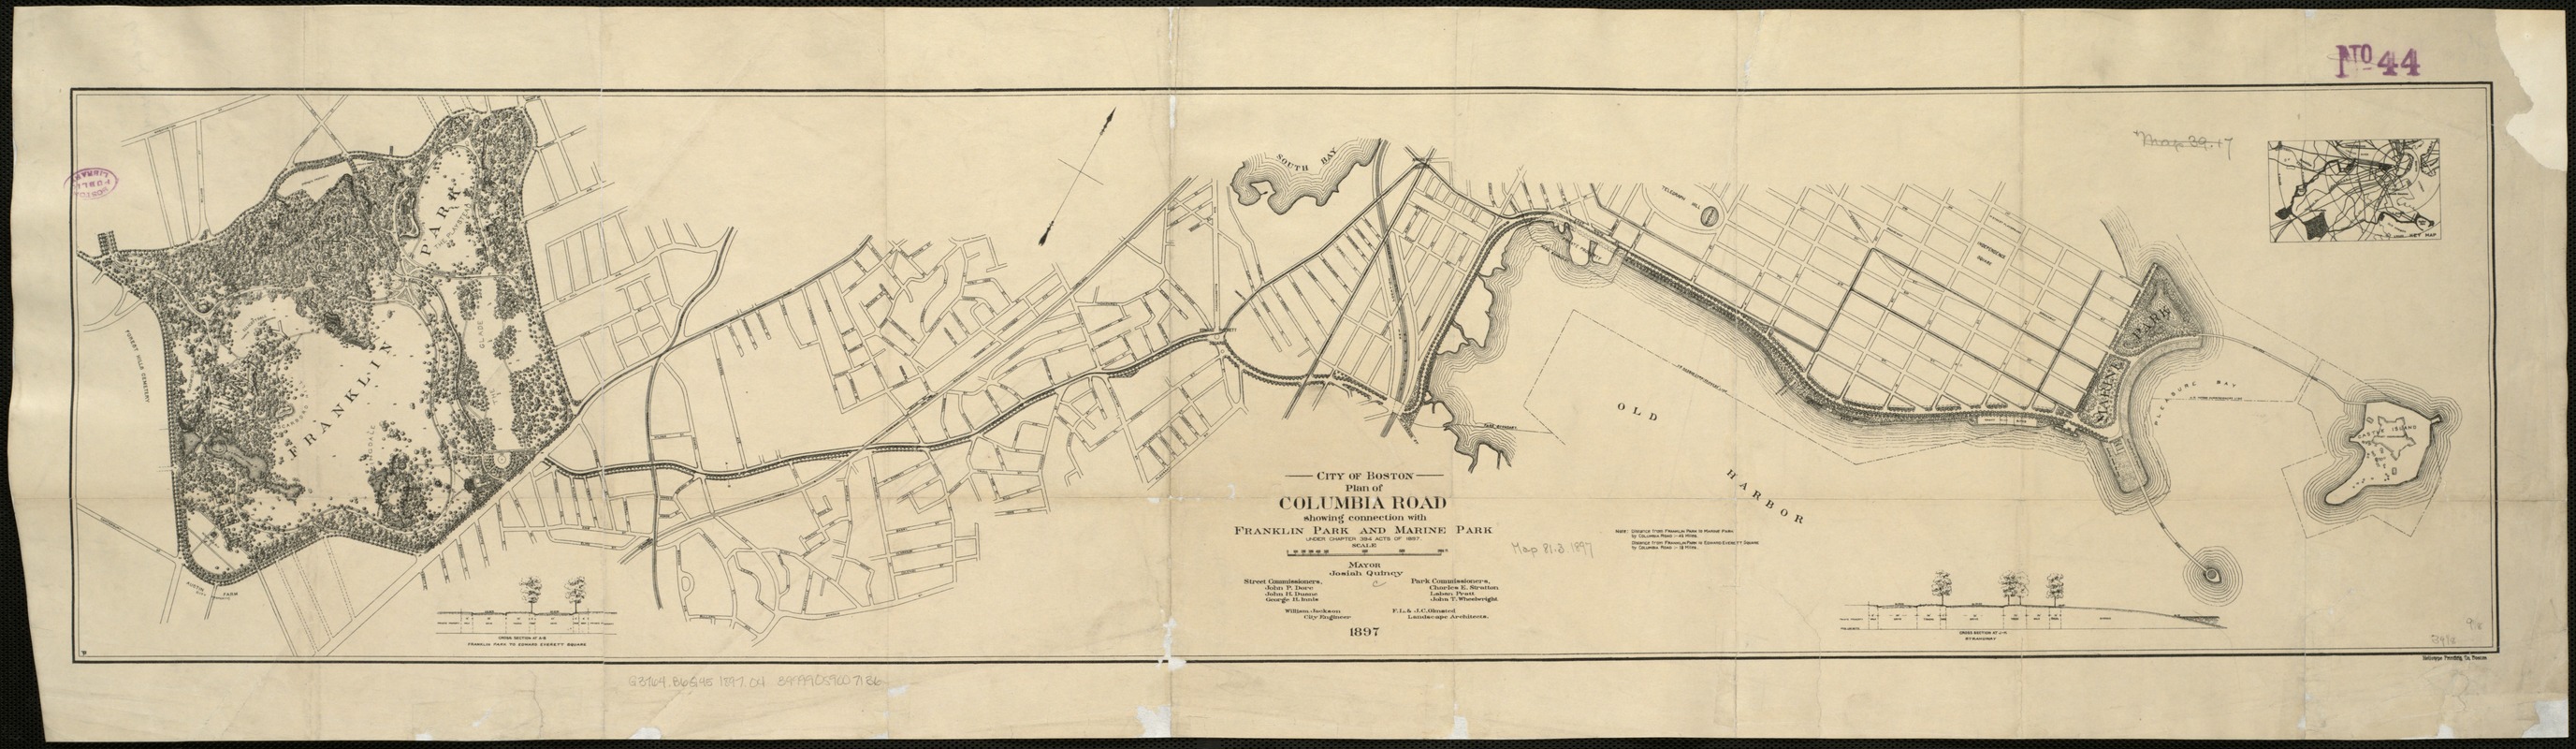 City of Boston plan of Columbia Road, showing connection with Franklin Park and Marine Park